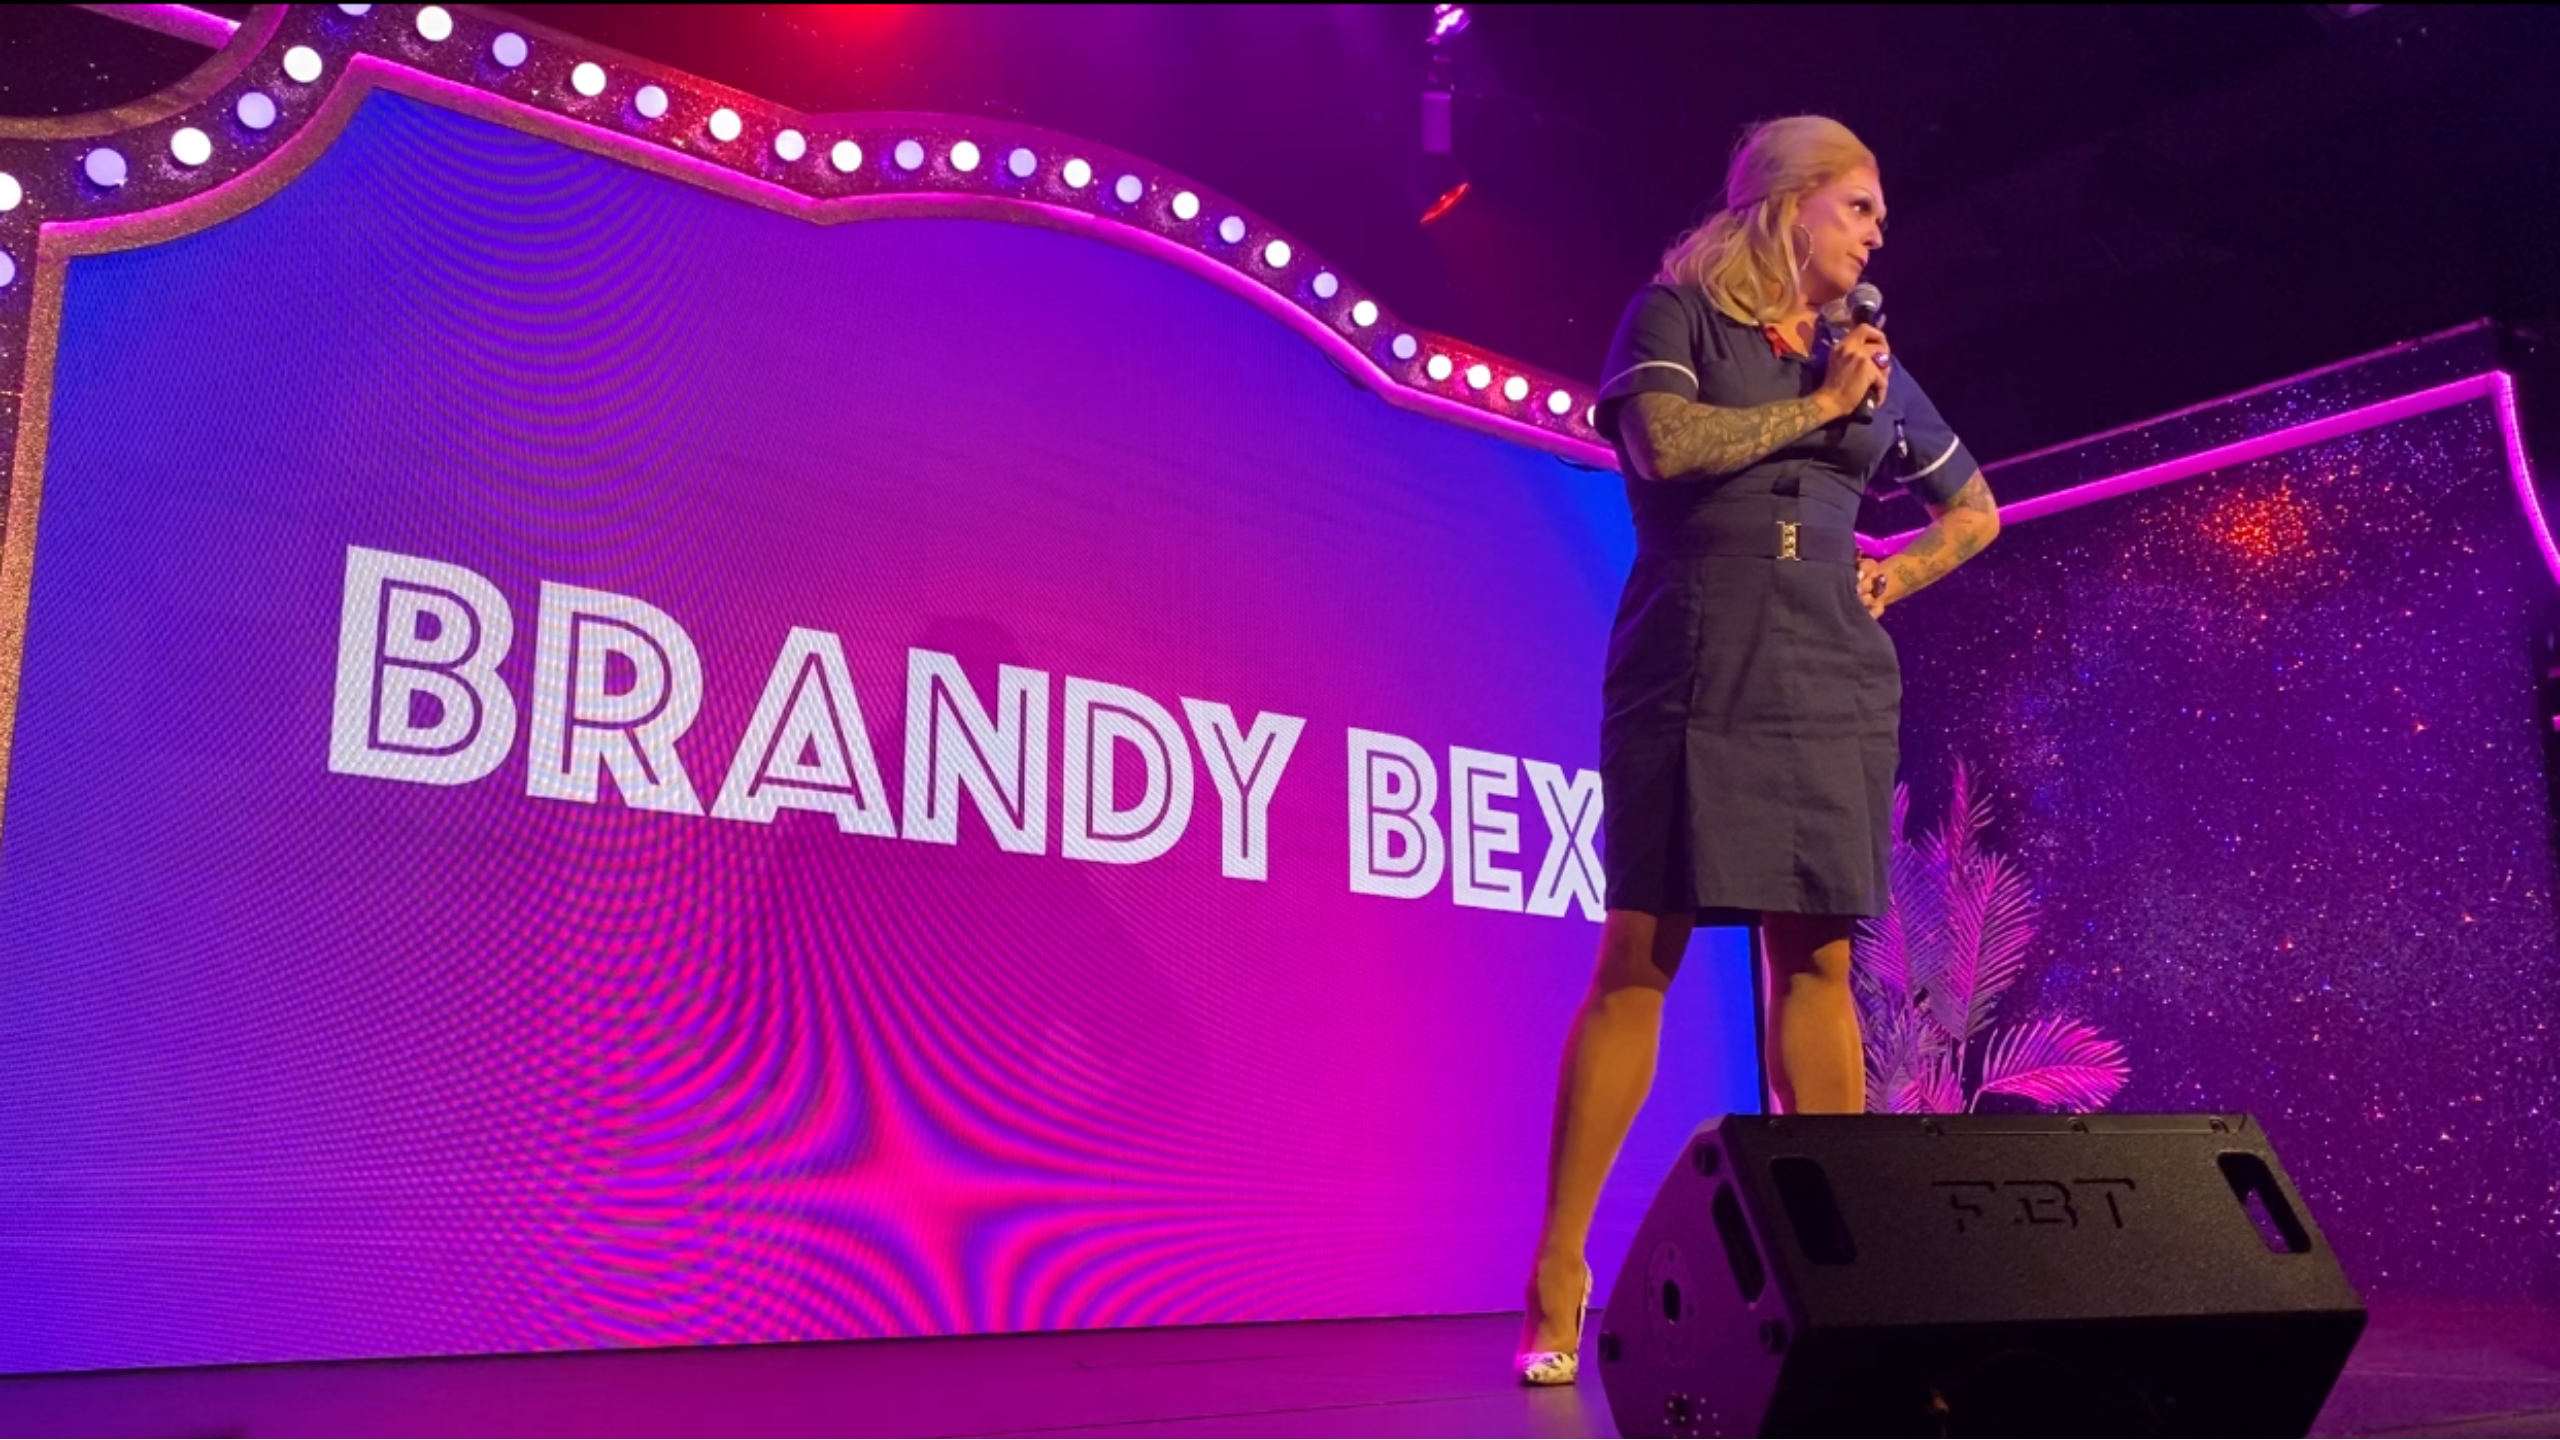 Load video: Brandy Bex performing in the semi-final of Pride&#39;s Got Talent 2022 in London.